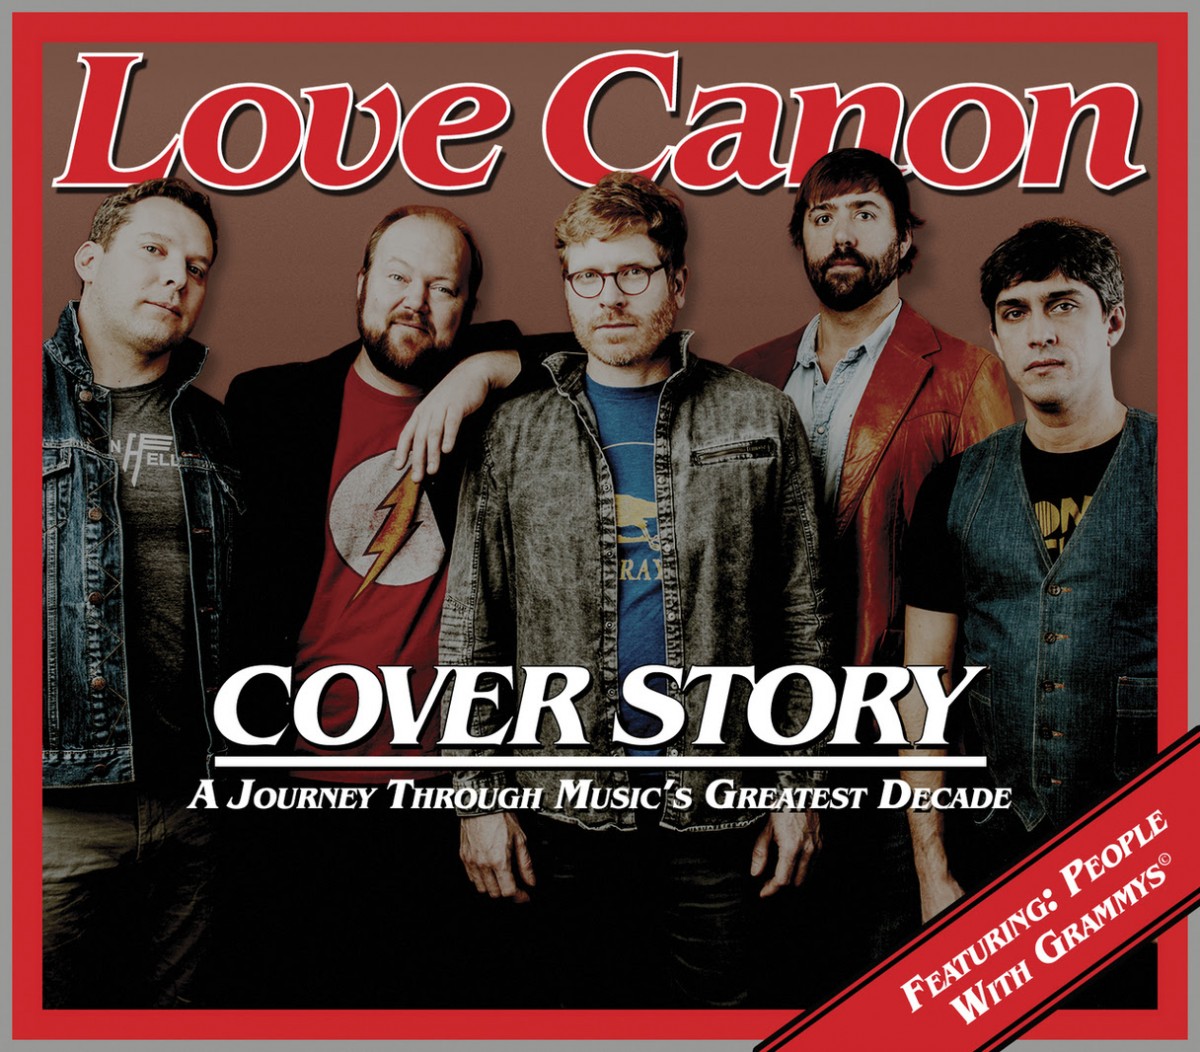 Love Canon is on their way to releasing their new album Cover Story July 13